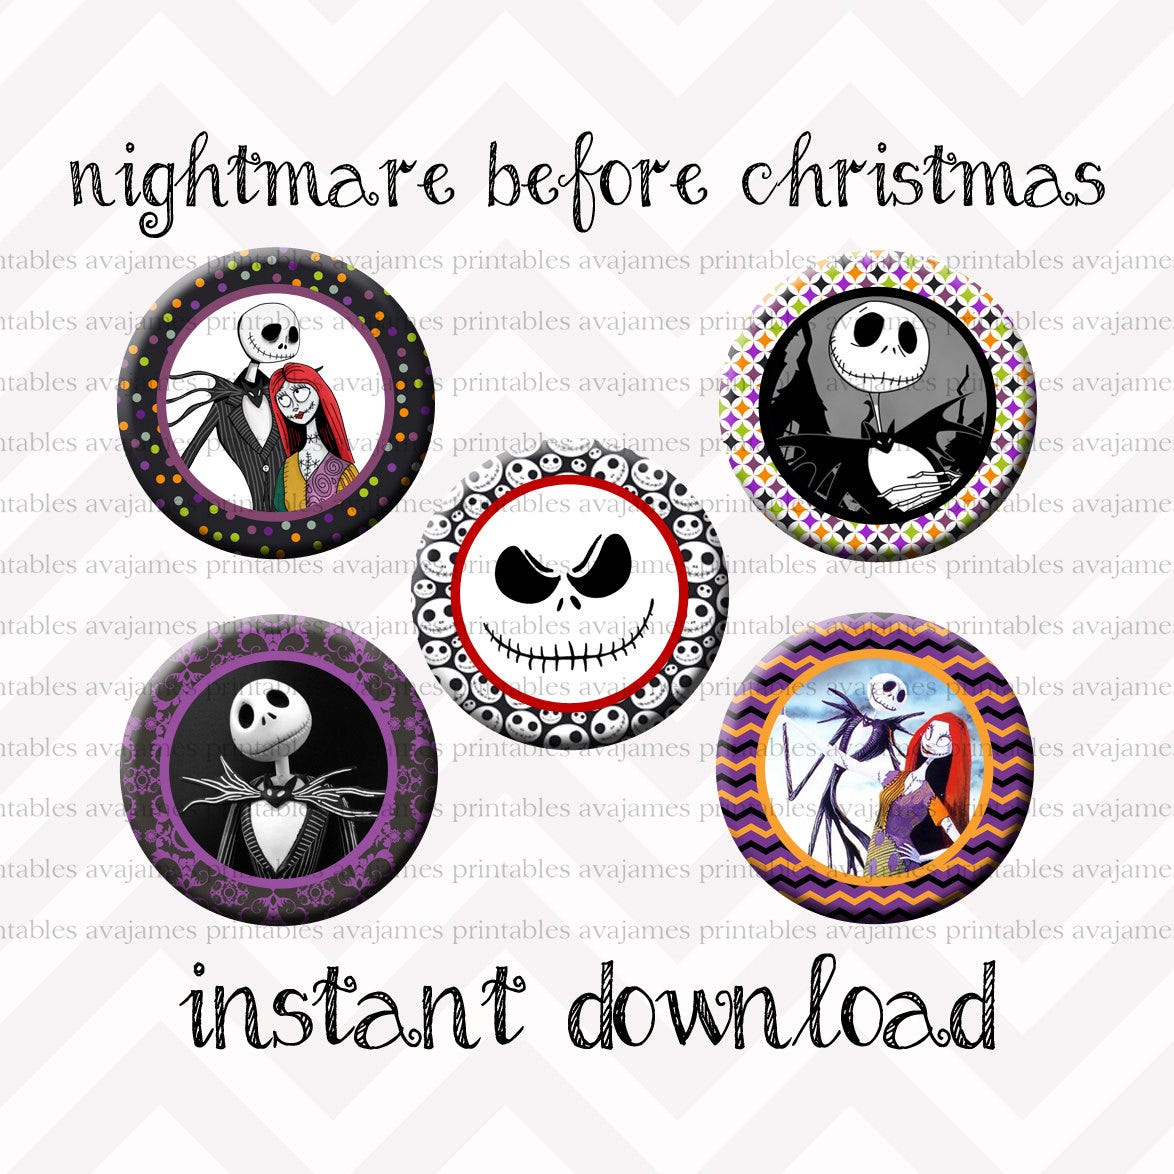 Instant Download - The Nightmare Before Christmas Bottle Cap Image Sheet